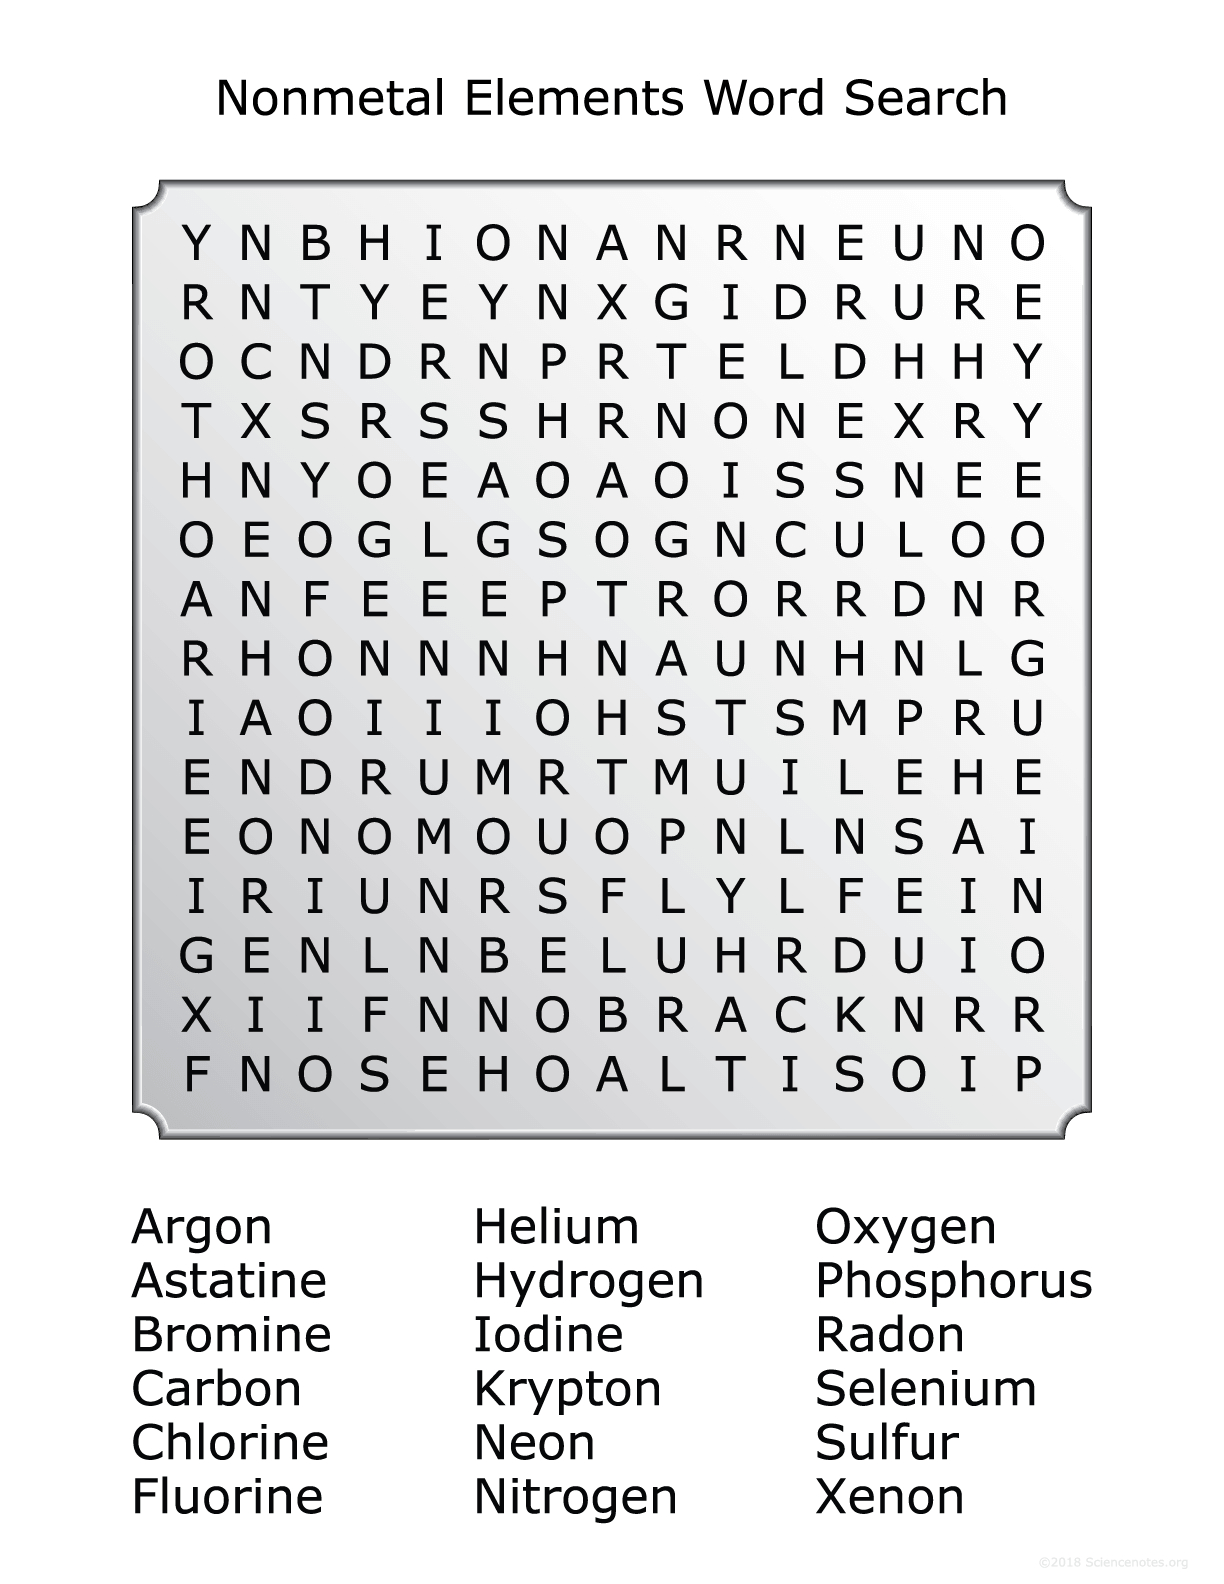 Nonmetals Word Search Puzzle